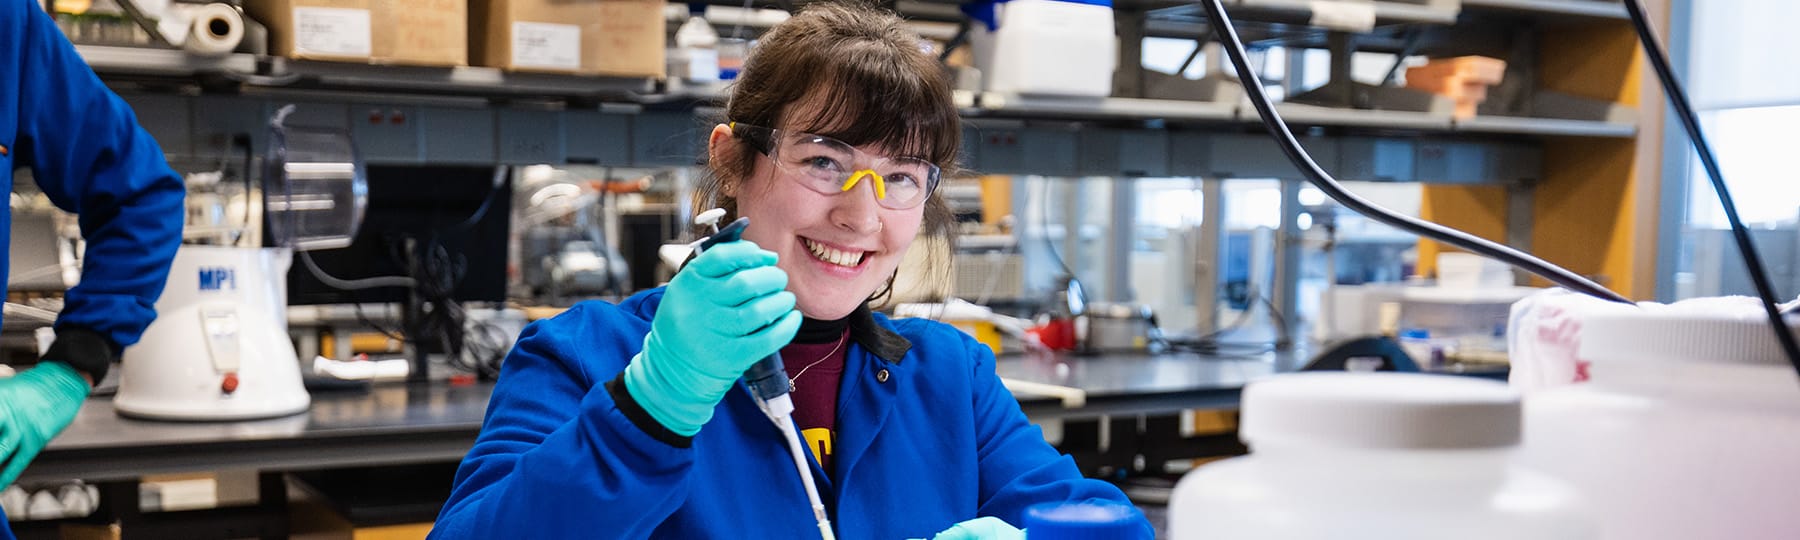 A female student in a blue lab coat and safety glasses holding a pipette works in a lab on campus.